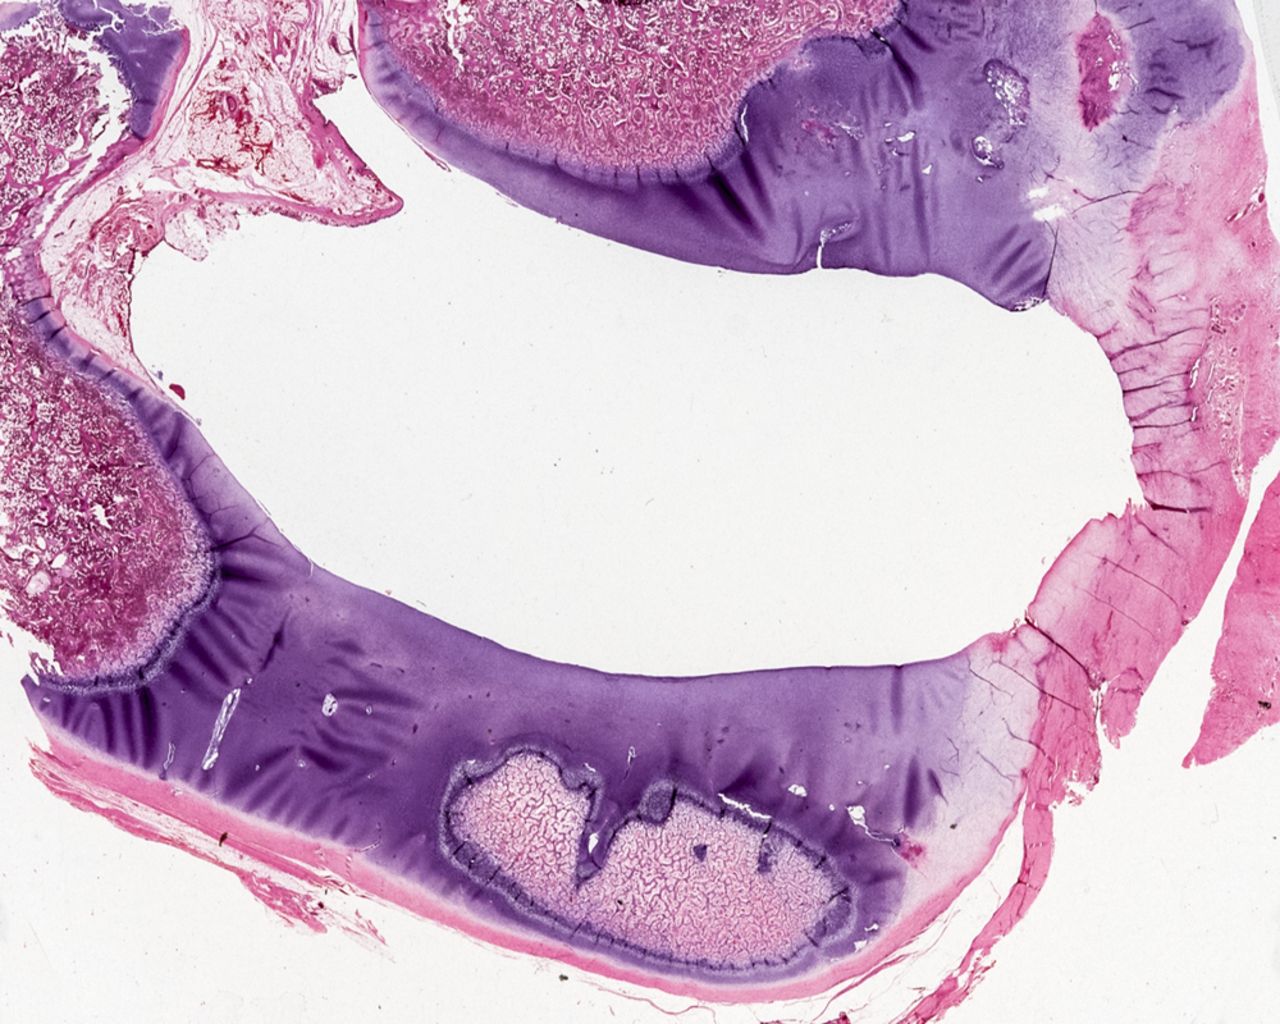 Fig. 6 
          Photomicrograph of histologic cross-section
of the acetabulum from the operated side eight weeks post-surgery
shows markedly abnormal articular cartilage surface shape, under-developed
and asymmetric bones and relatively more extensive persisting cartilage
(hematoxylin and eosin stain).
        